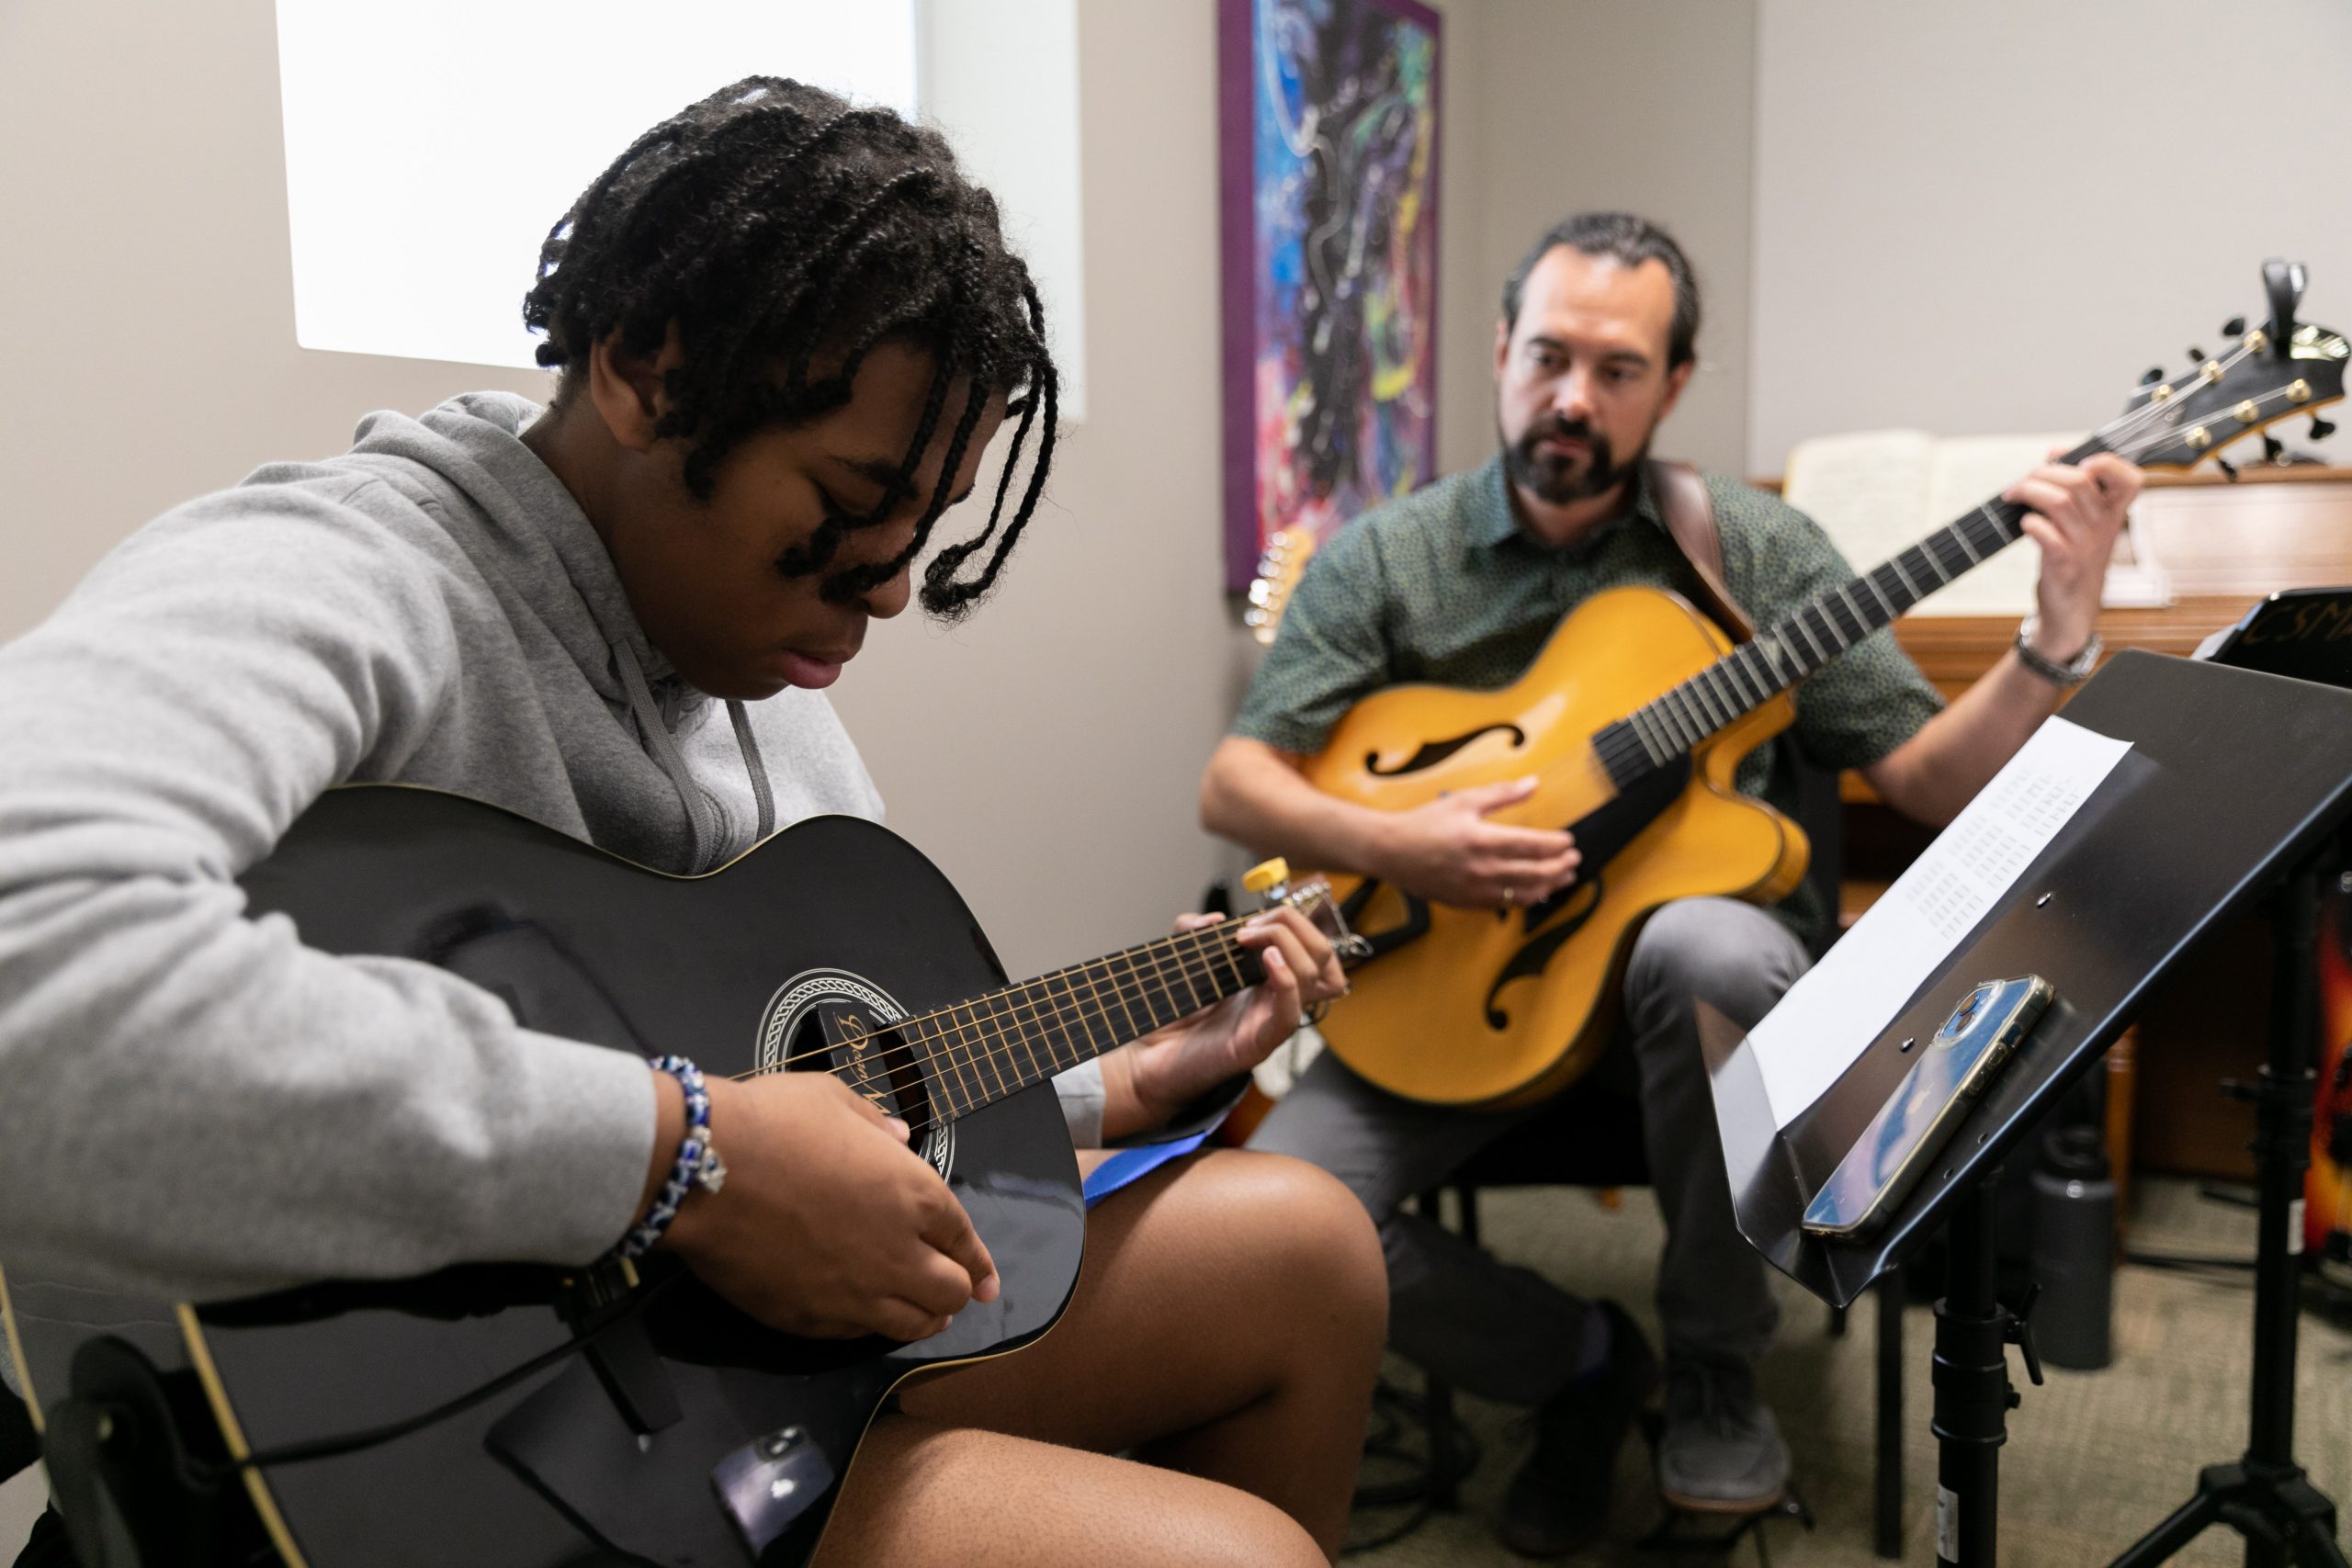 A private guitar lesson at Community Music School in the Martin Guitar Studio.  On the right, teacher Joe Wagner with a blue button down shirt, dark hair pulled back in a ponytail, and holding a white, black, and brown electric guitar, points to music on a stand.  Teenage student, Andrew, wearing a blue polo shirt, and holding a black and white electric guitar looks on intensely. 